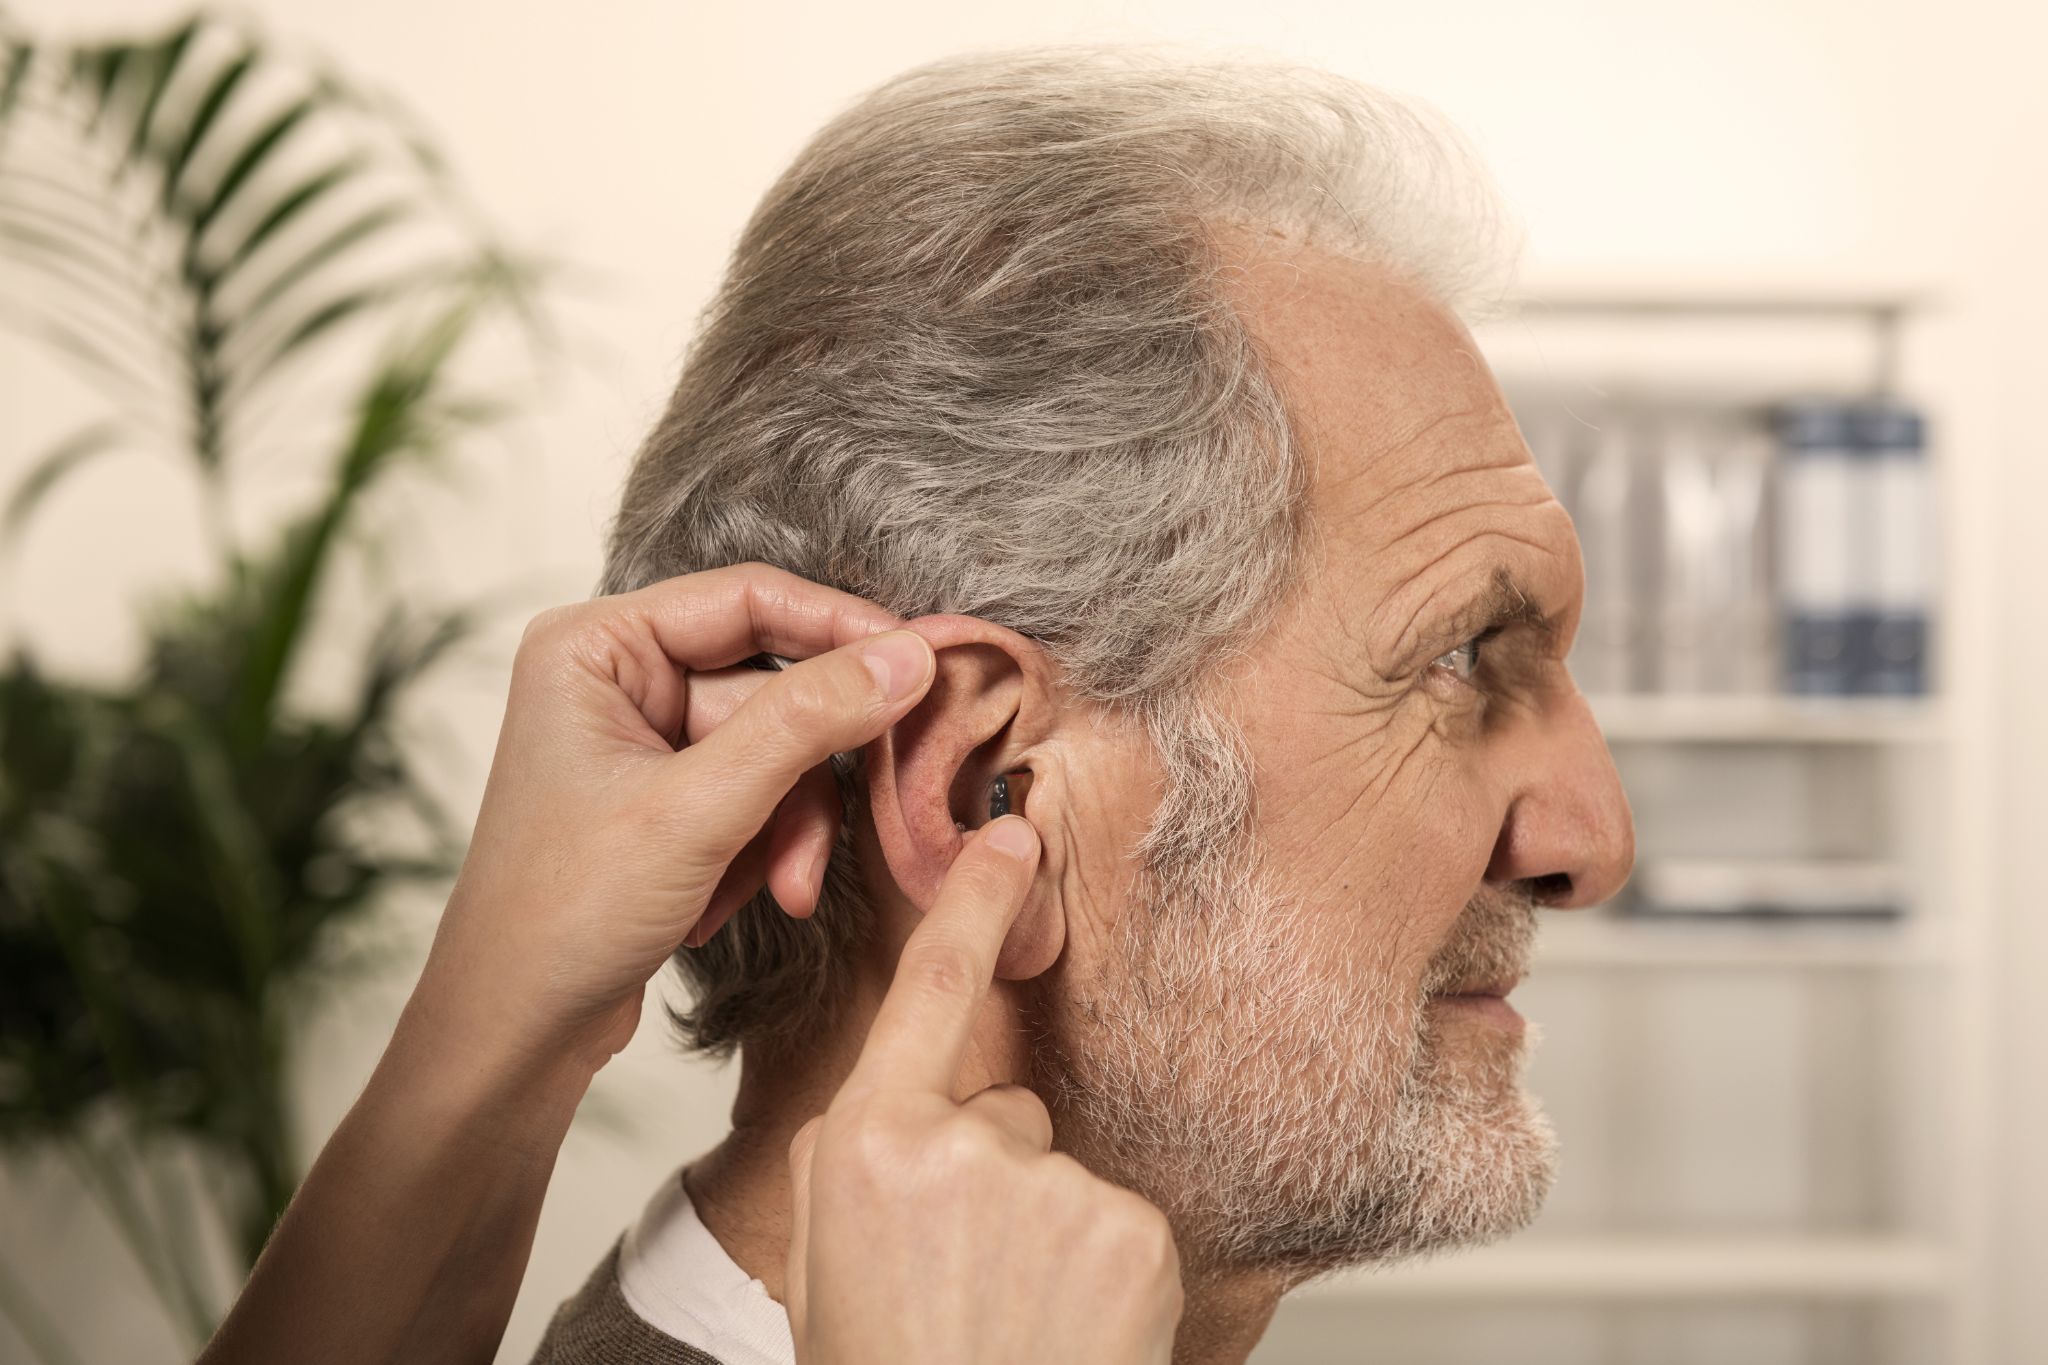 The Real Reasons Your Ears Itch - Houston ENT Doctor